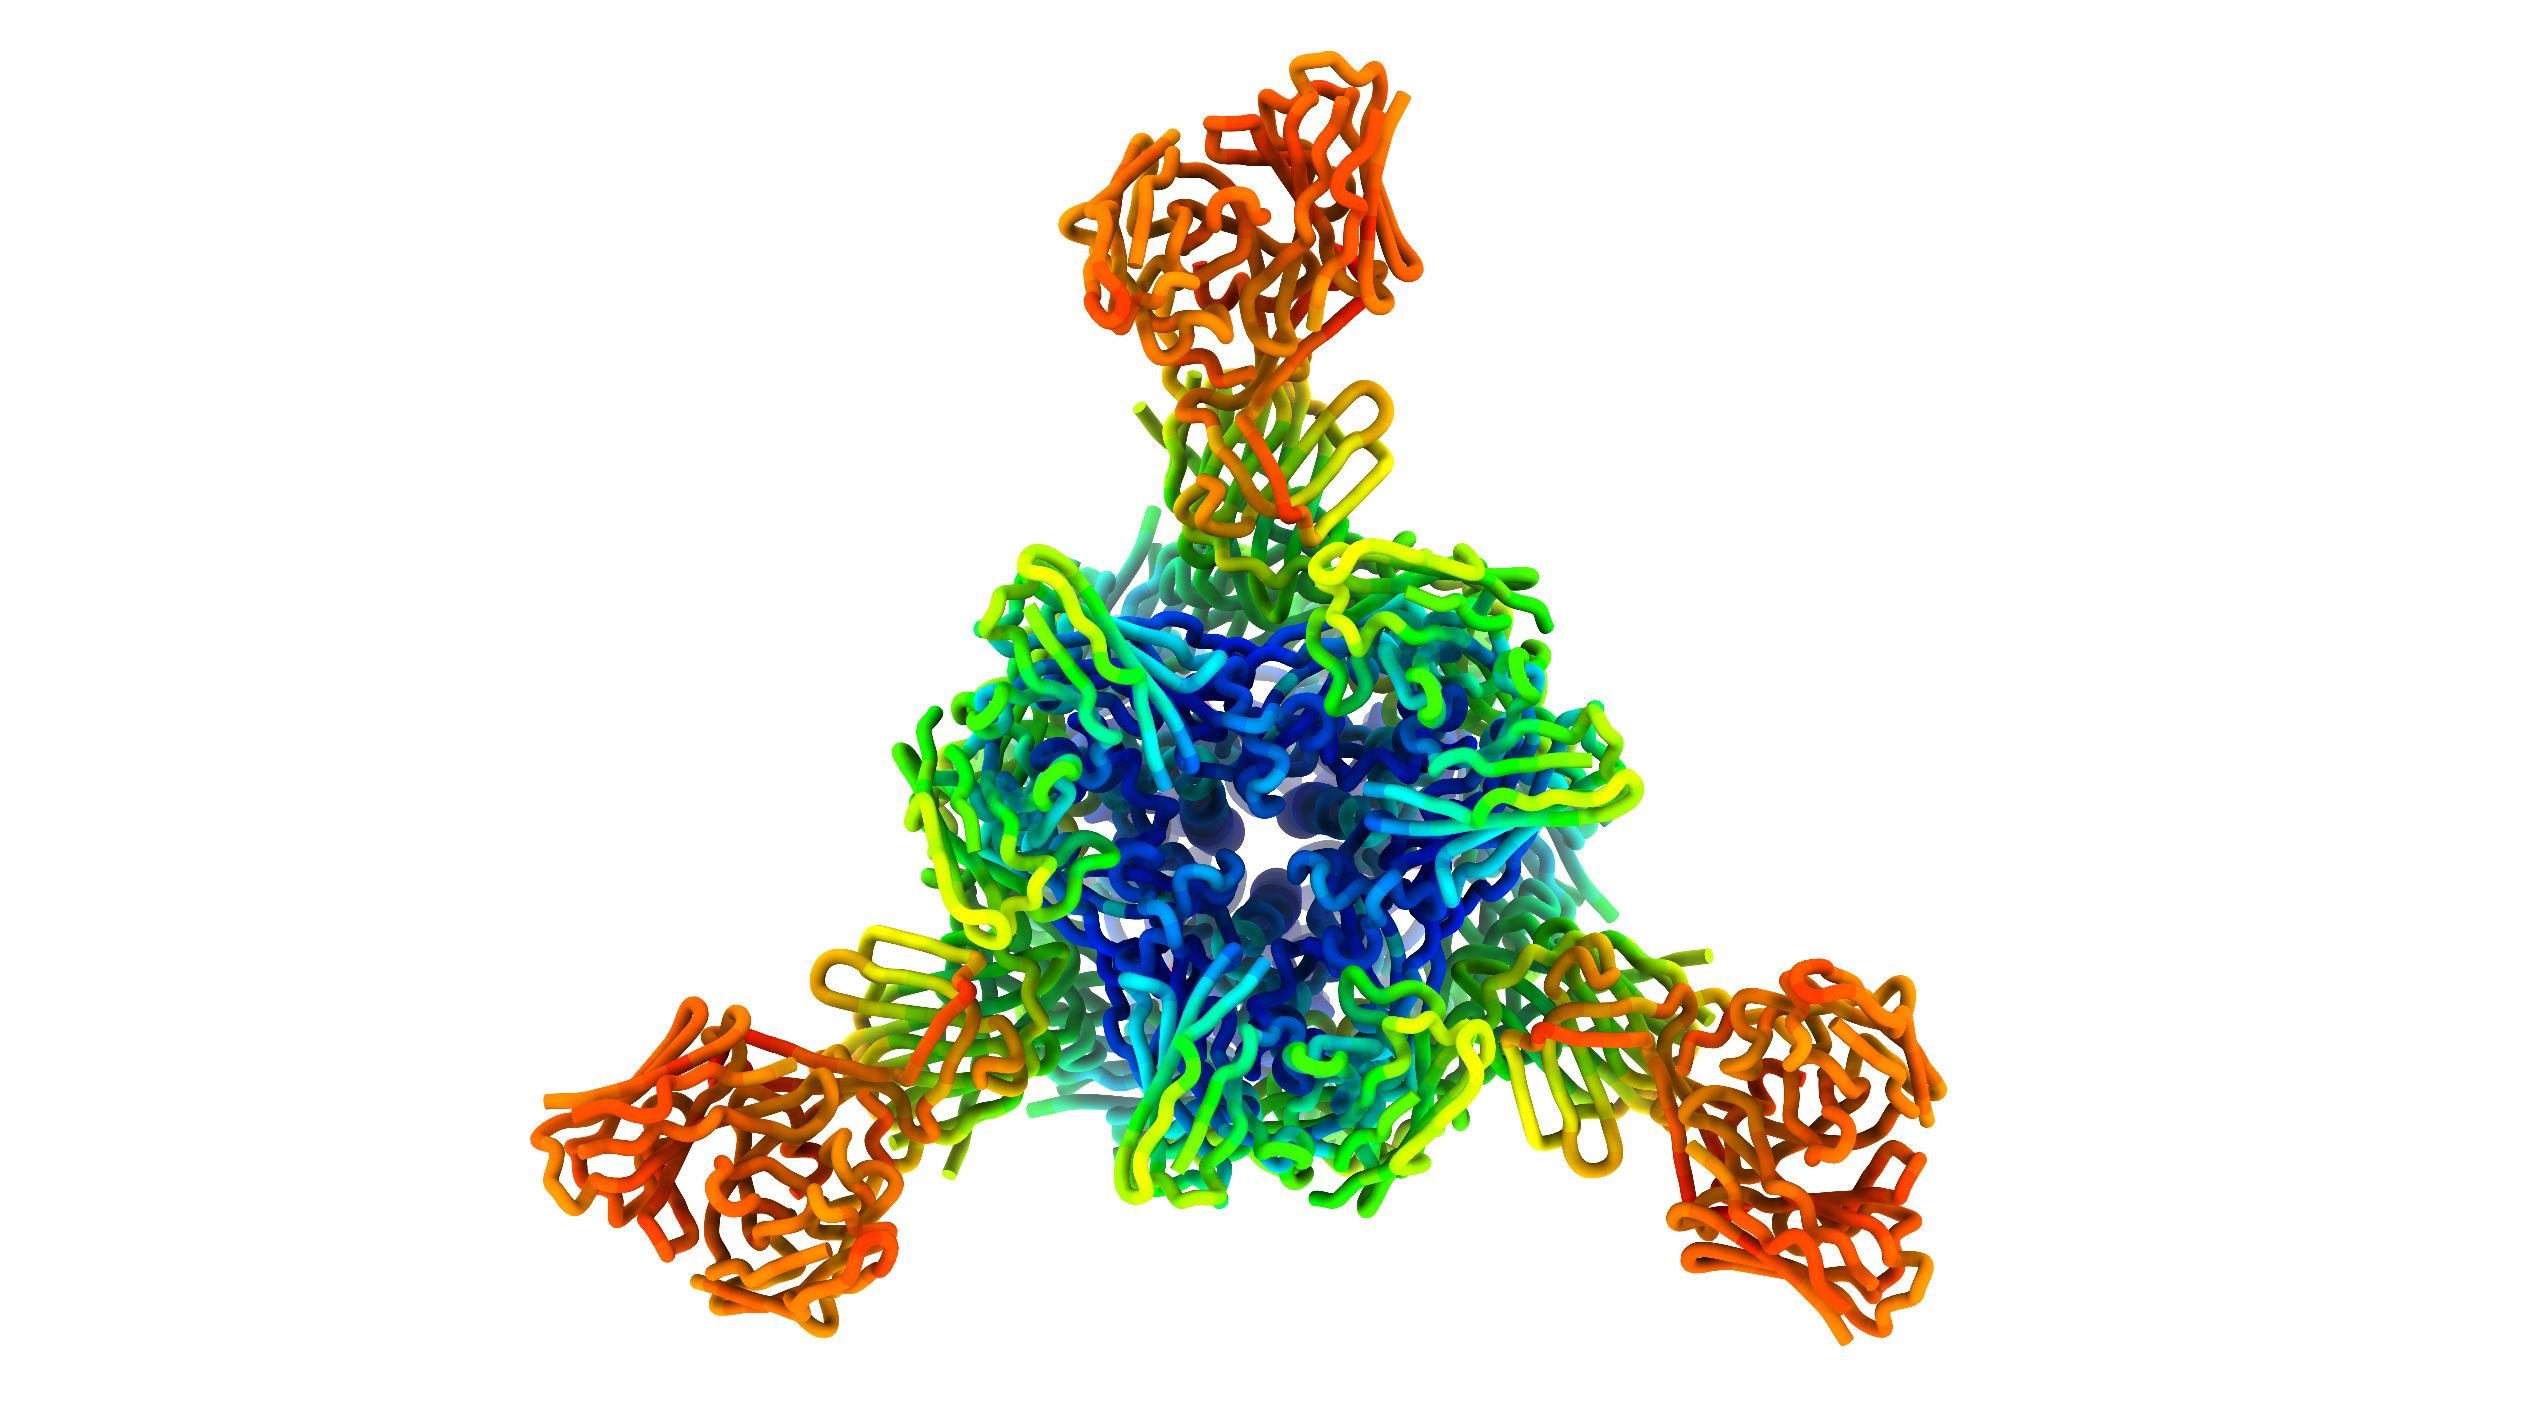 3D ribbon diagram of antibodies bound to the spike protein trimer.